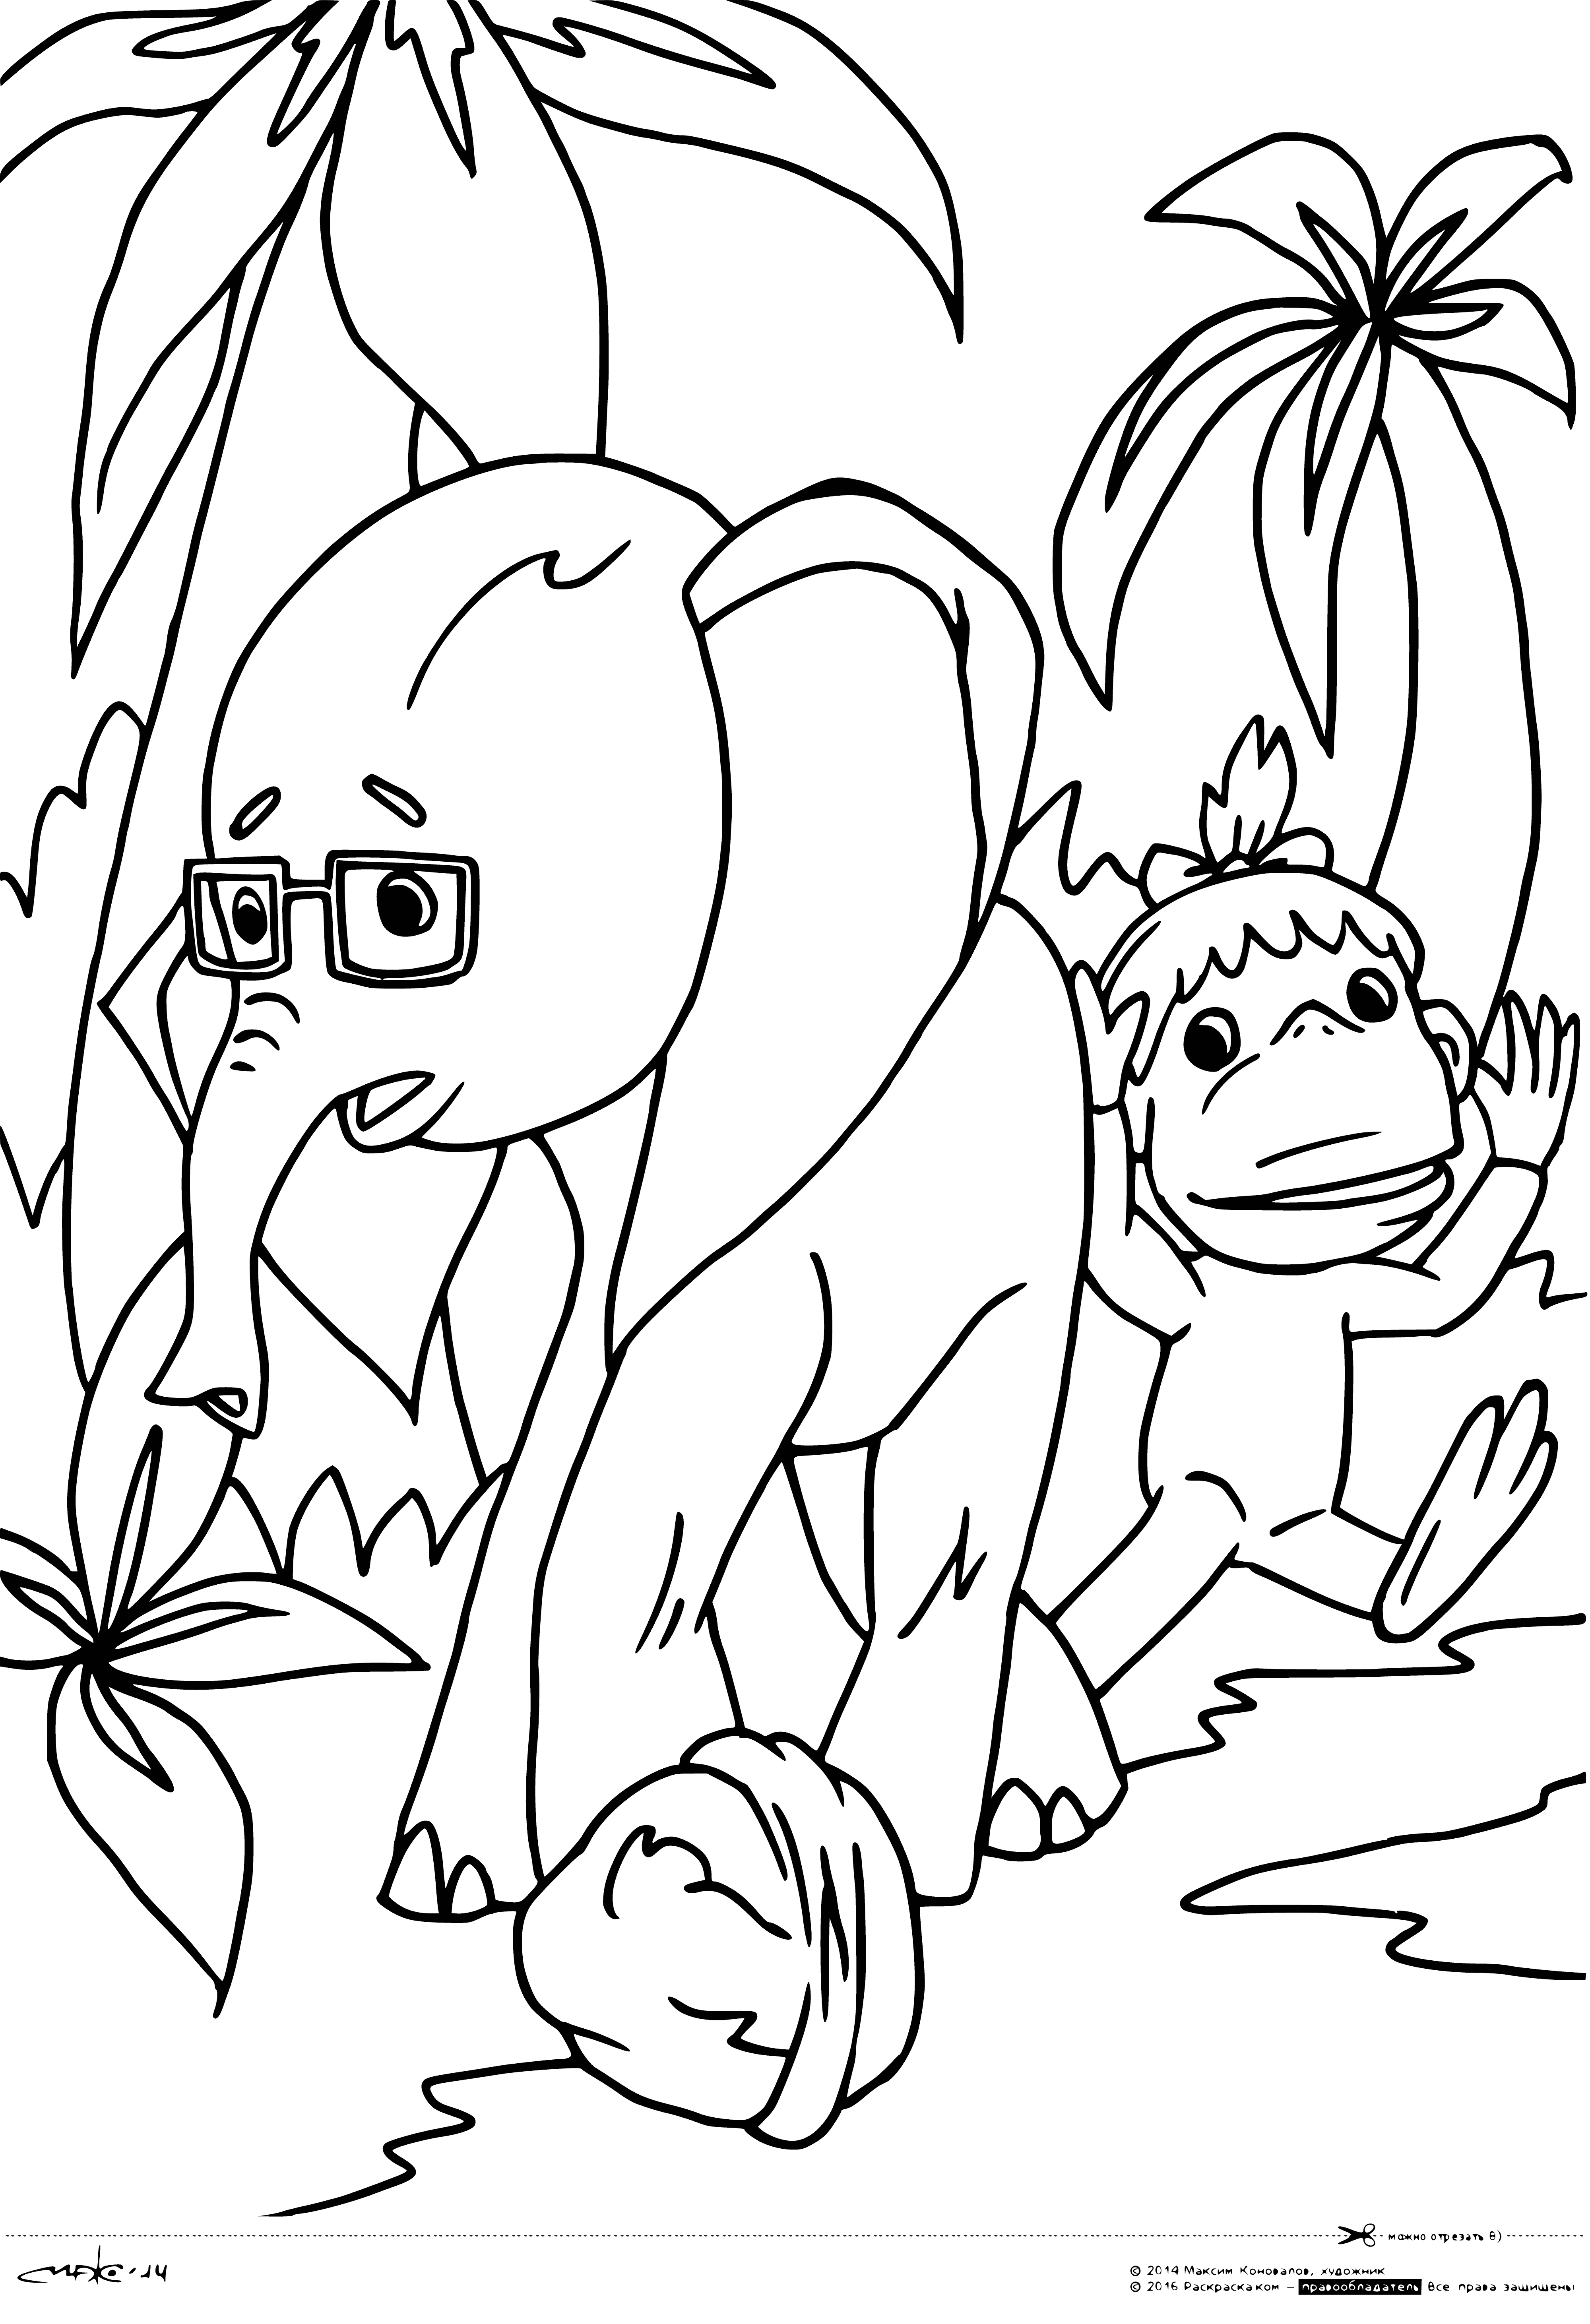 coloring page: 38 parrots of various colors perch; some eating, some preening & some just sitting. Baby elephant & monkey play in background.